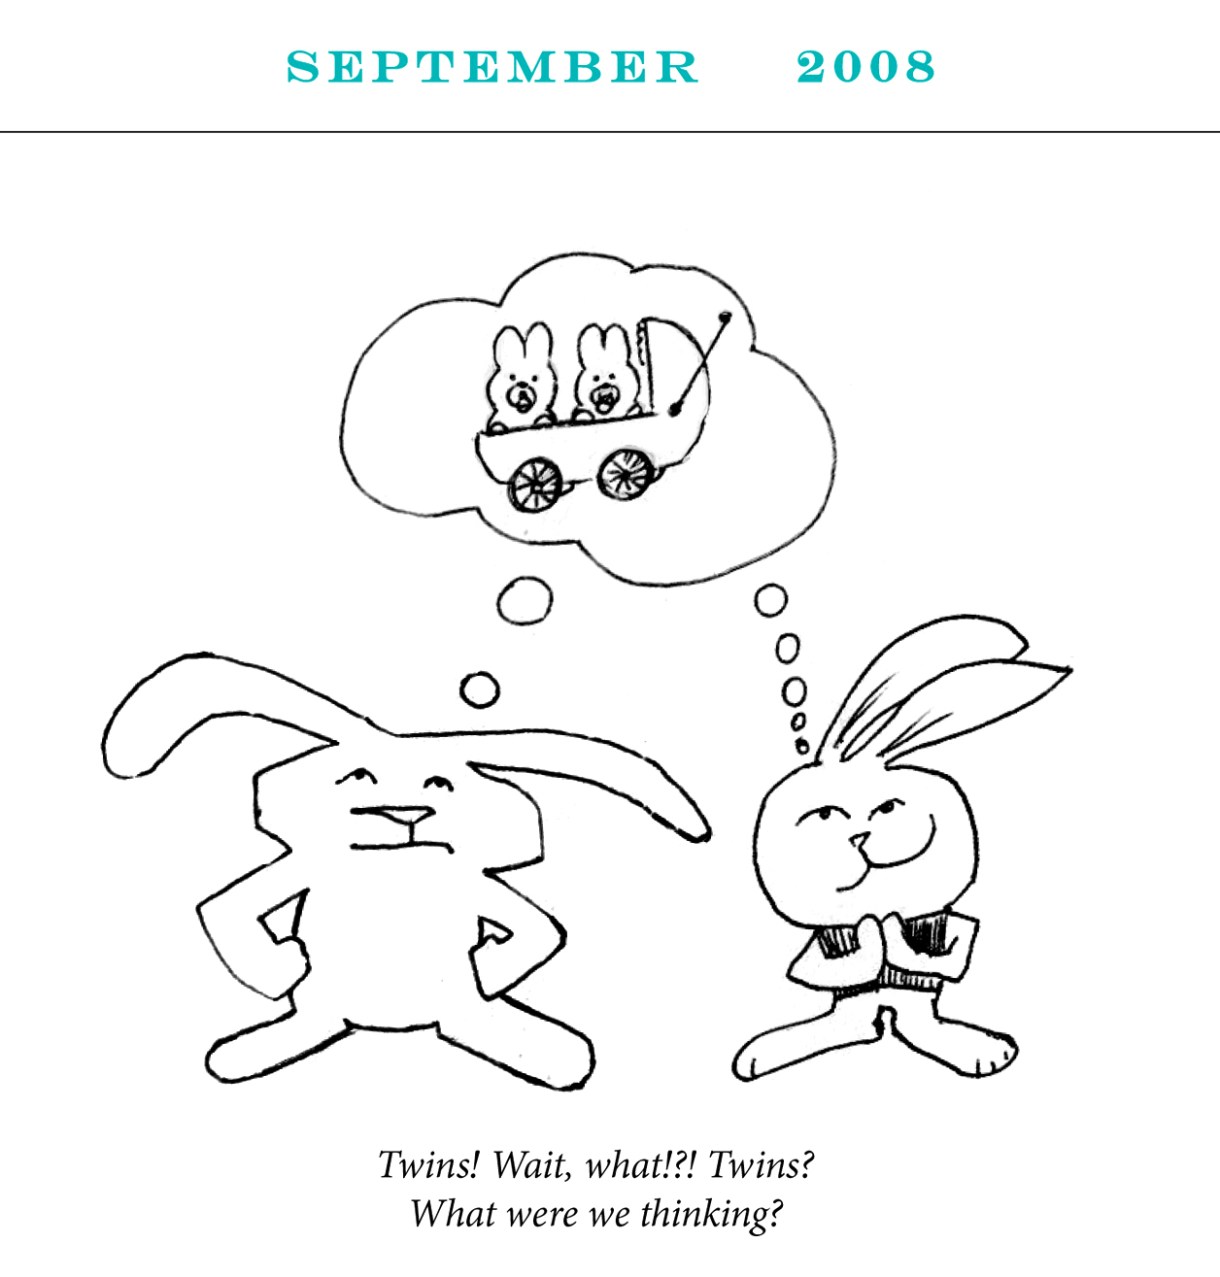 September 2008 Image description: Two rabbits share a thought bubble containing a pair of baby bunnies in a stroller. One of the adult rabbits is dreamy and happy. The other has her hands on her hips looking up with concern Caption: “Twins! Wait, what!?! Twins? What were we thinking?